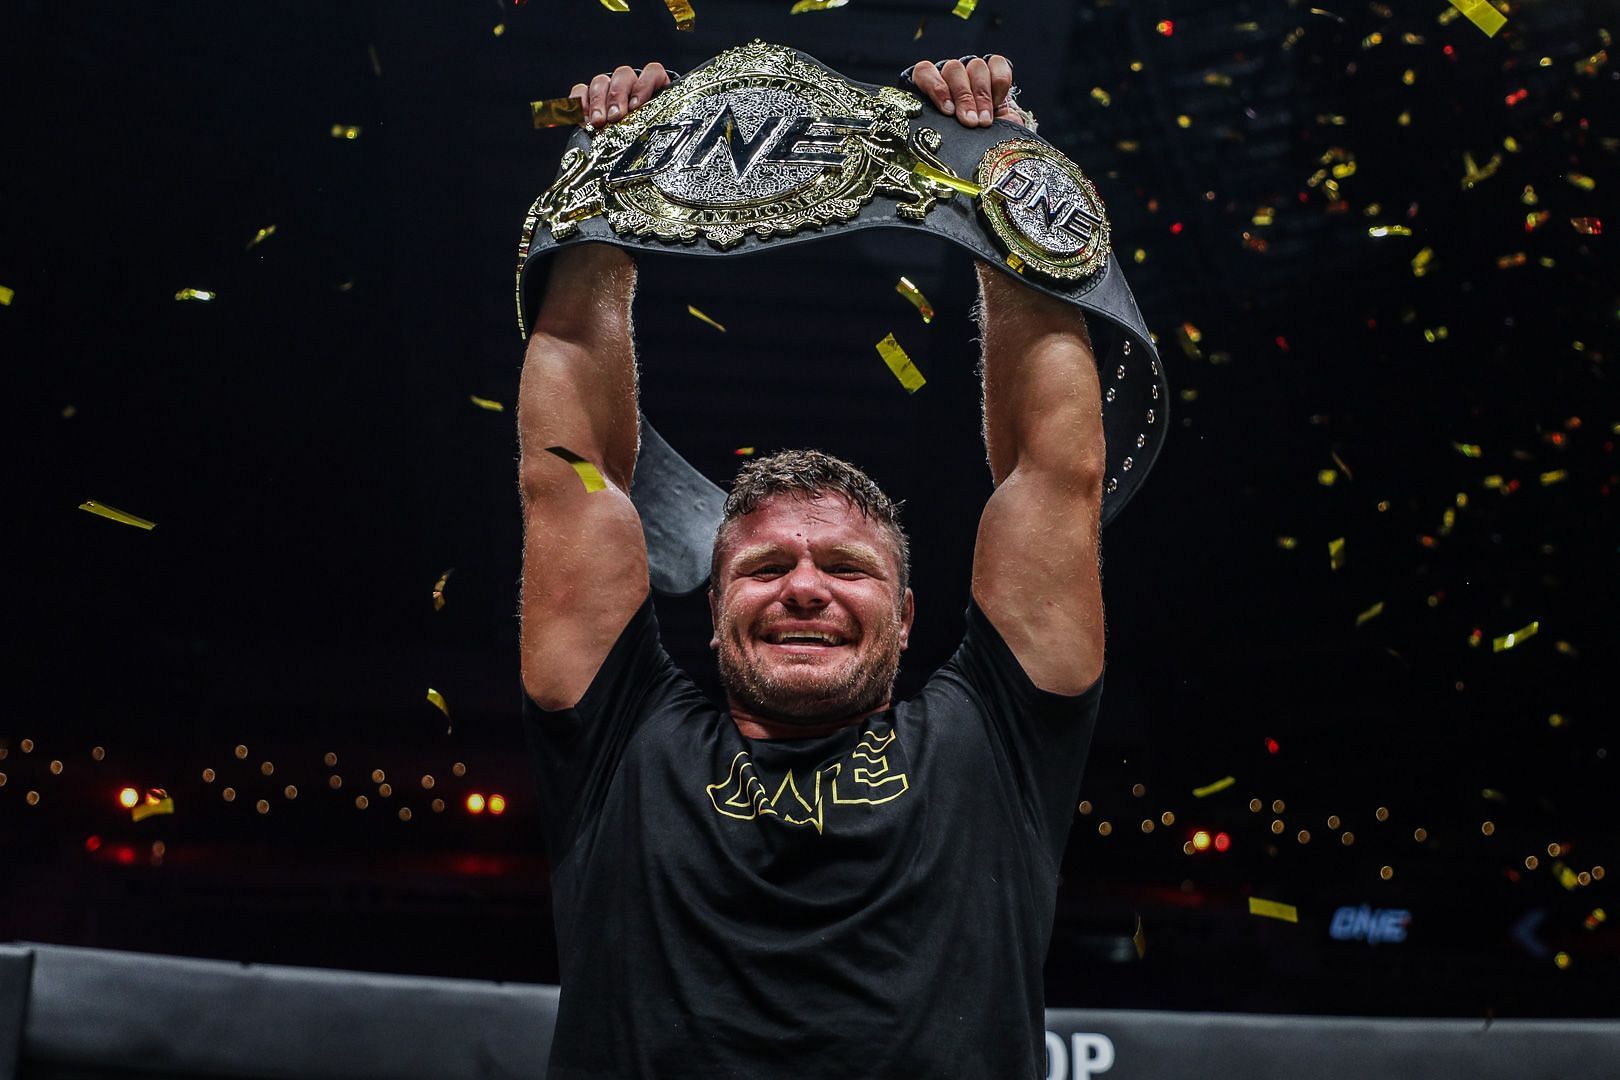 Anatoly Malykhin becomes the ONE Championship interim title holder after knocking out Kirill Grishenko